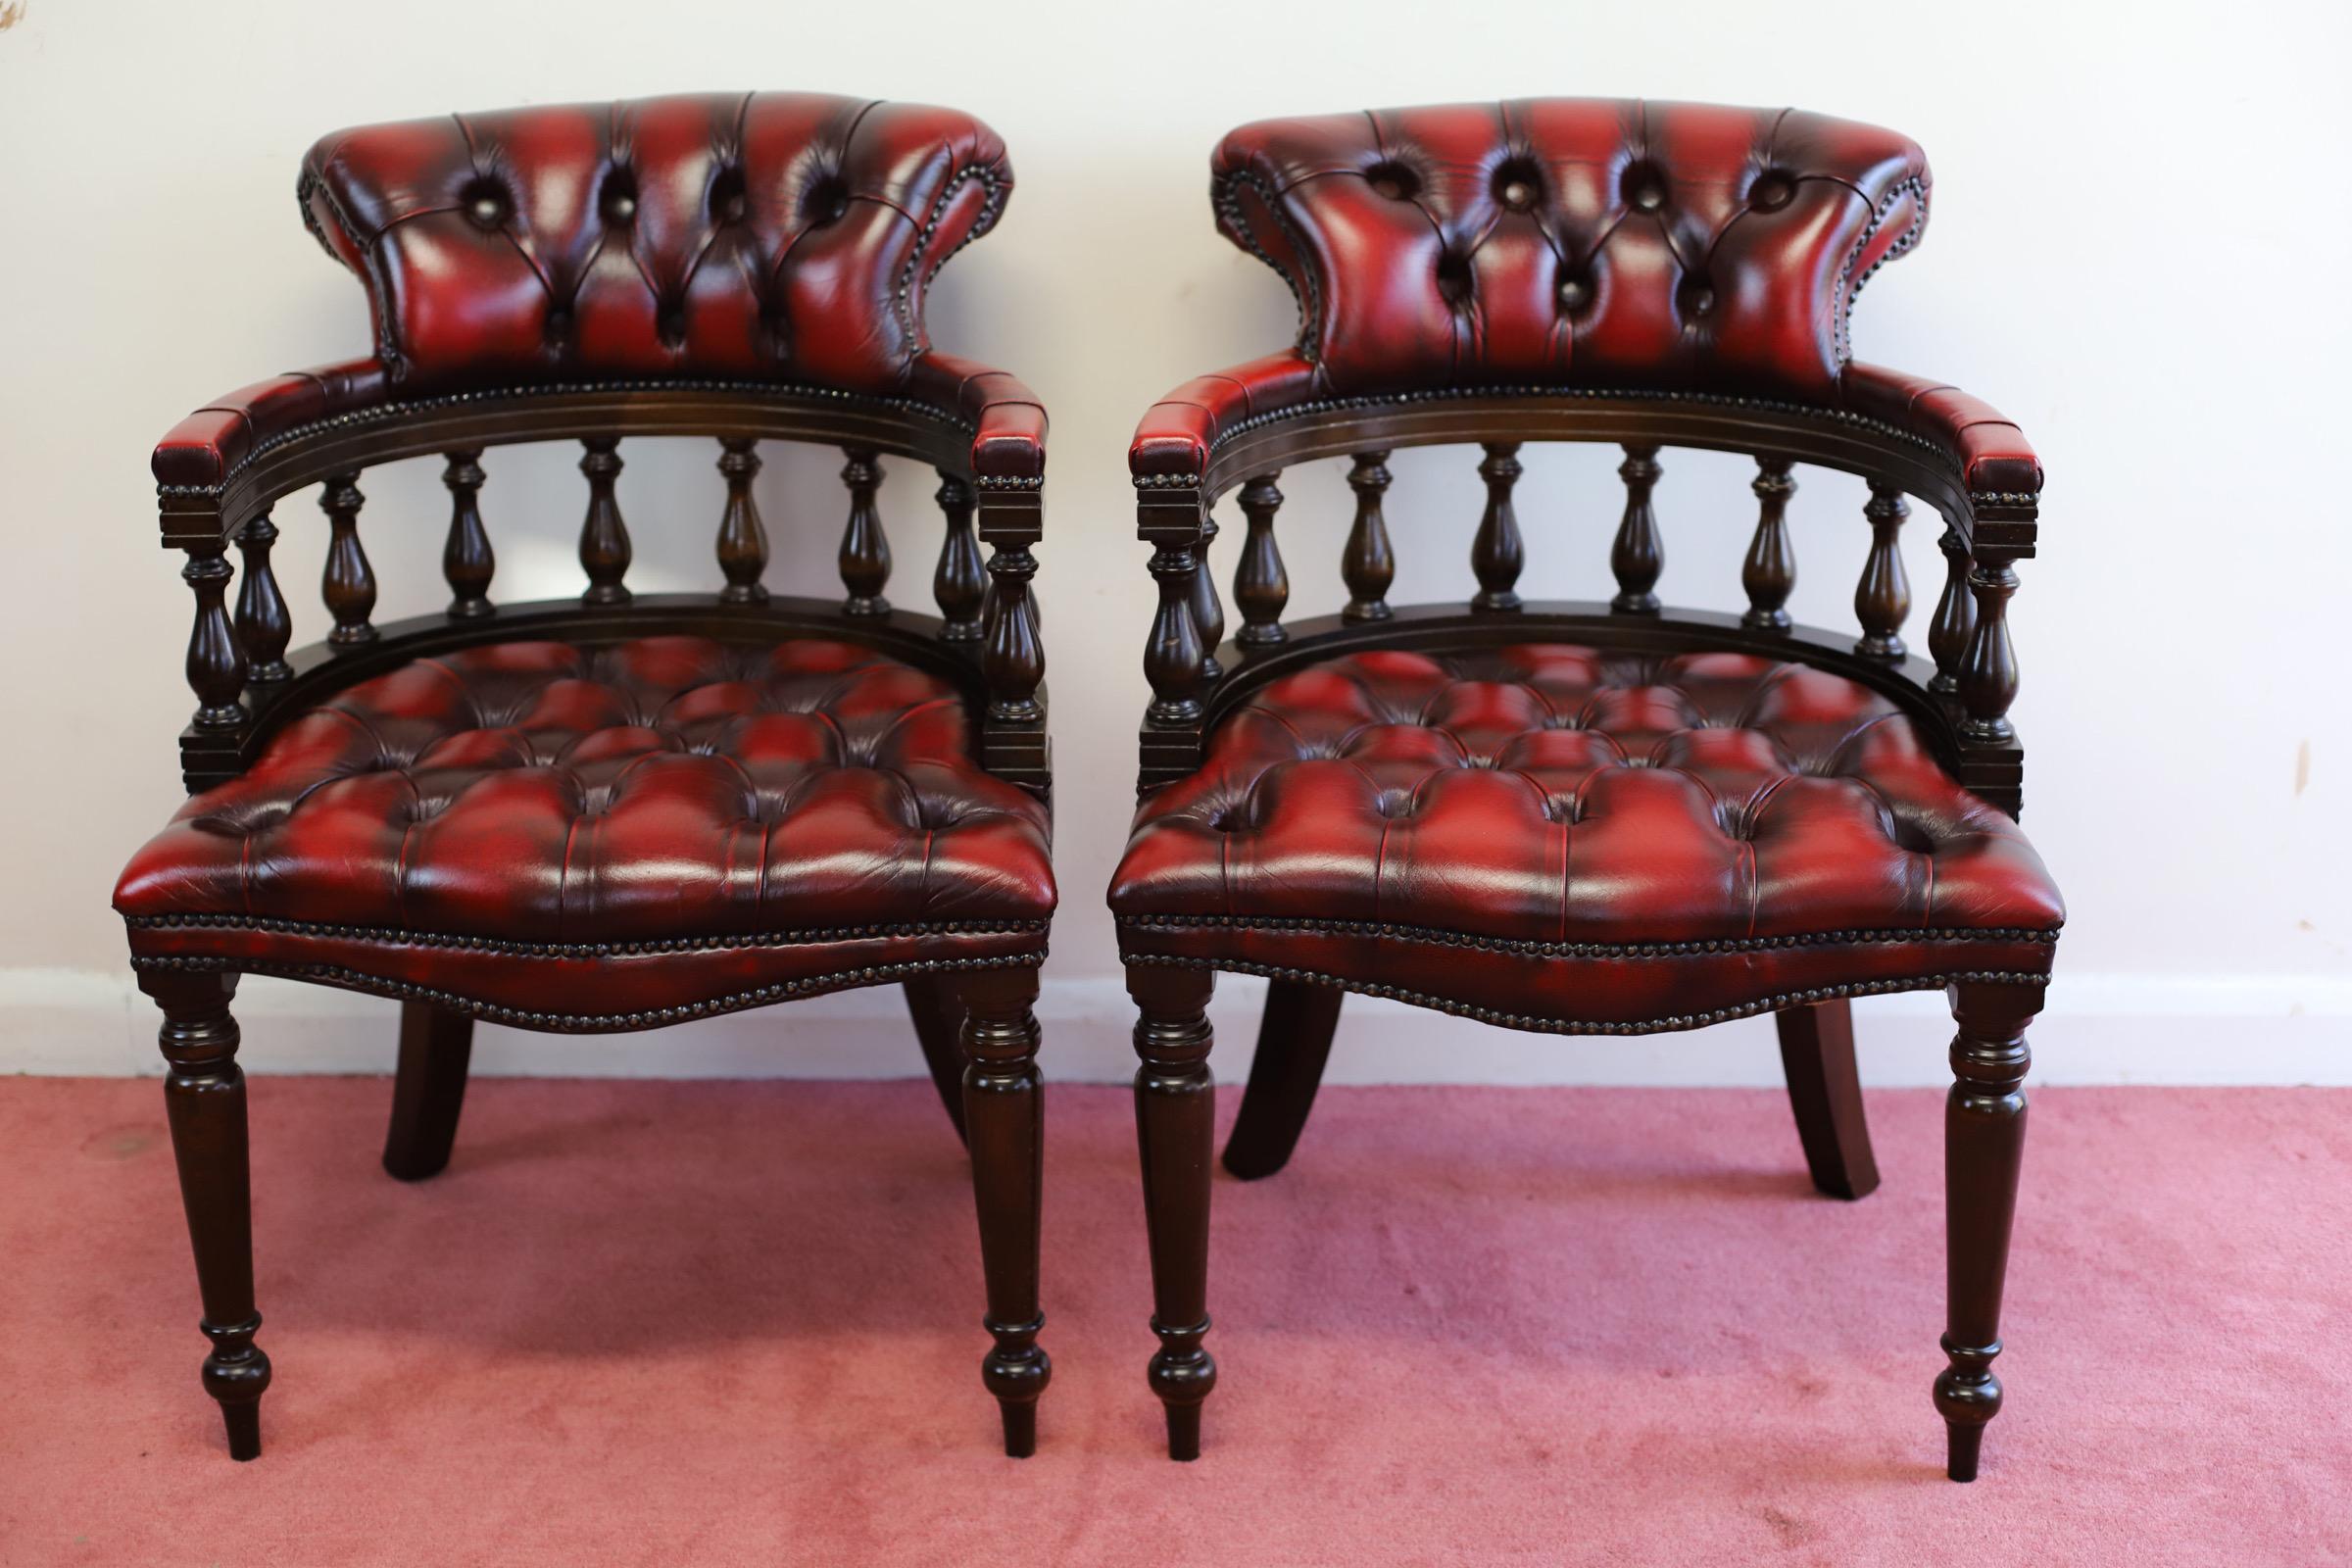 delight to offer for sale this pair of Antique Vicorian style red leather desk chair on a polished wood frame, in excellent condition & dating from around the 1960’s period. This type of chair is very comfortable with the curved back & practicable